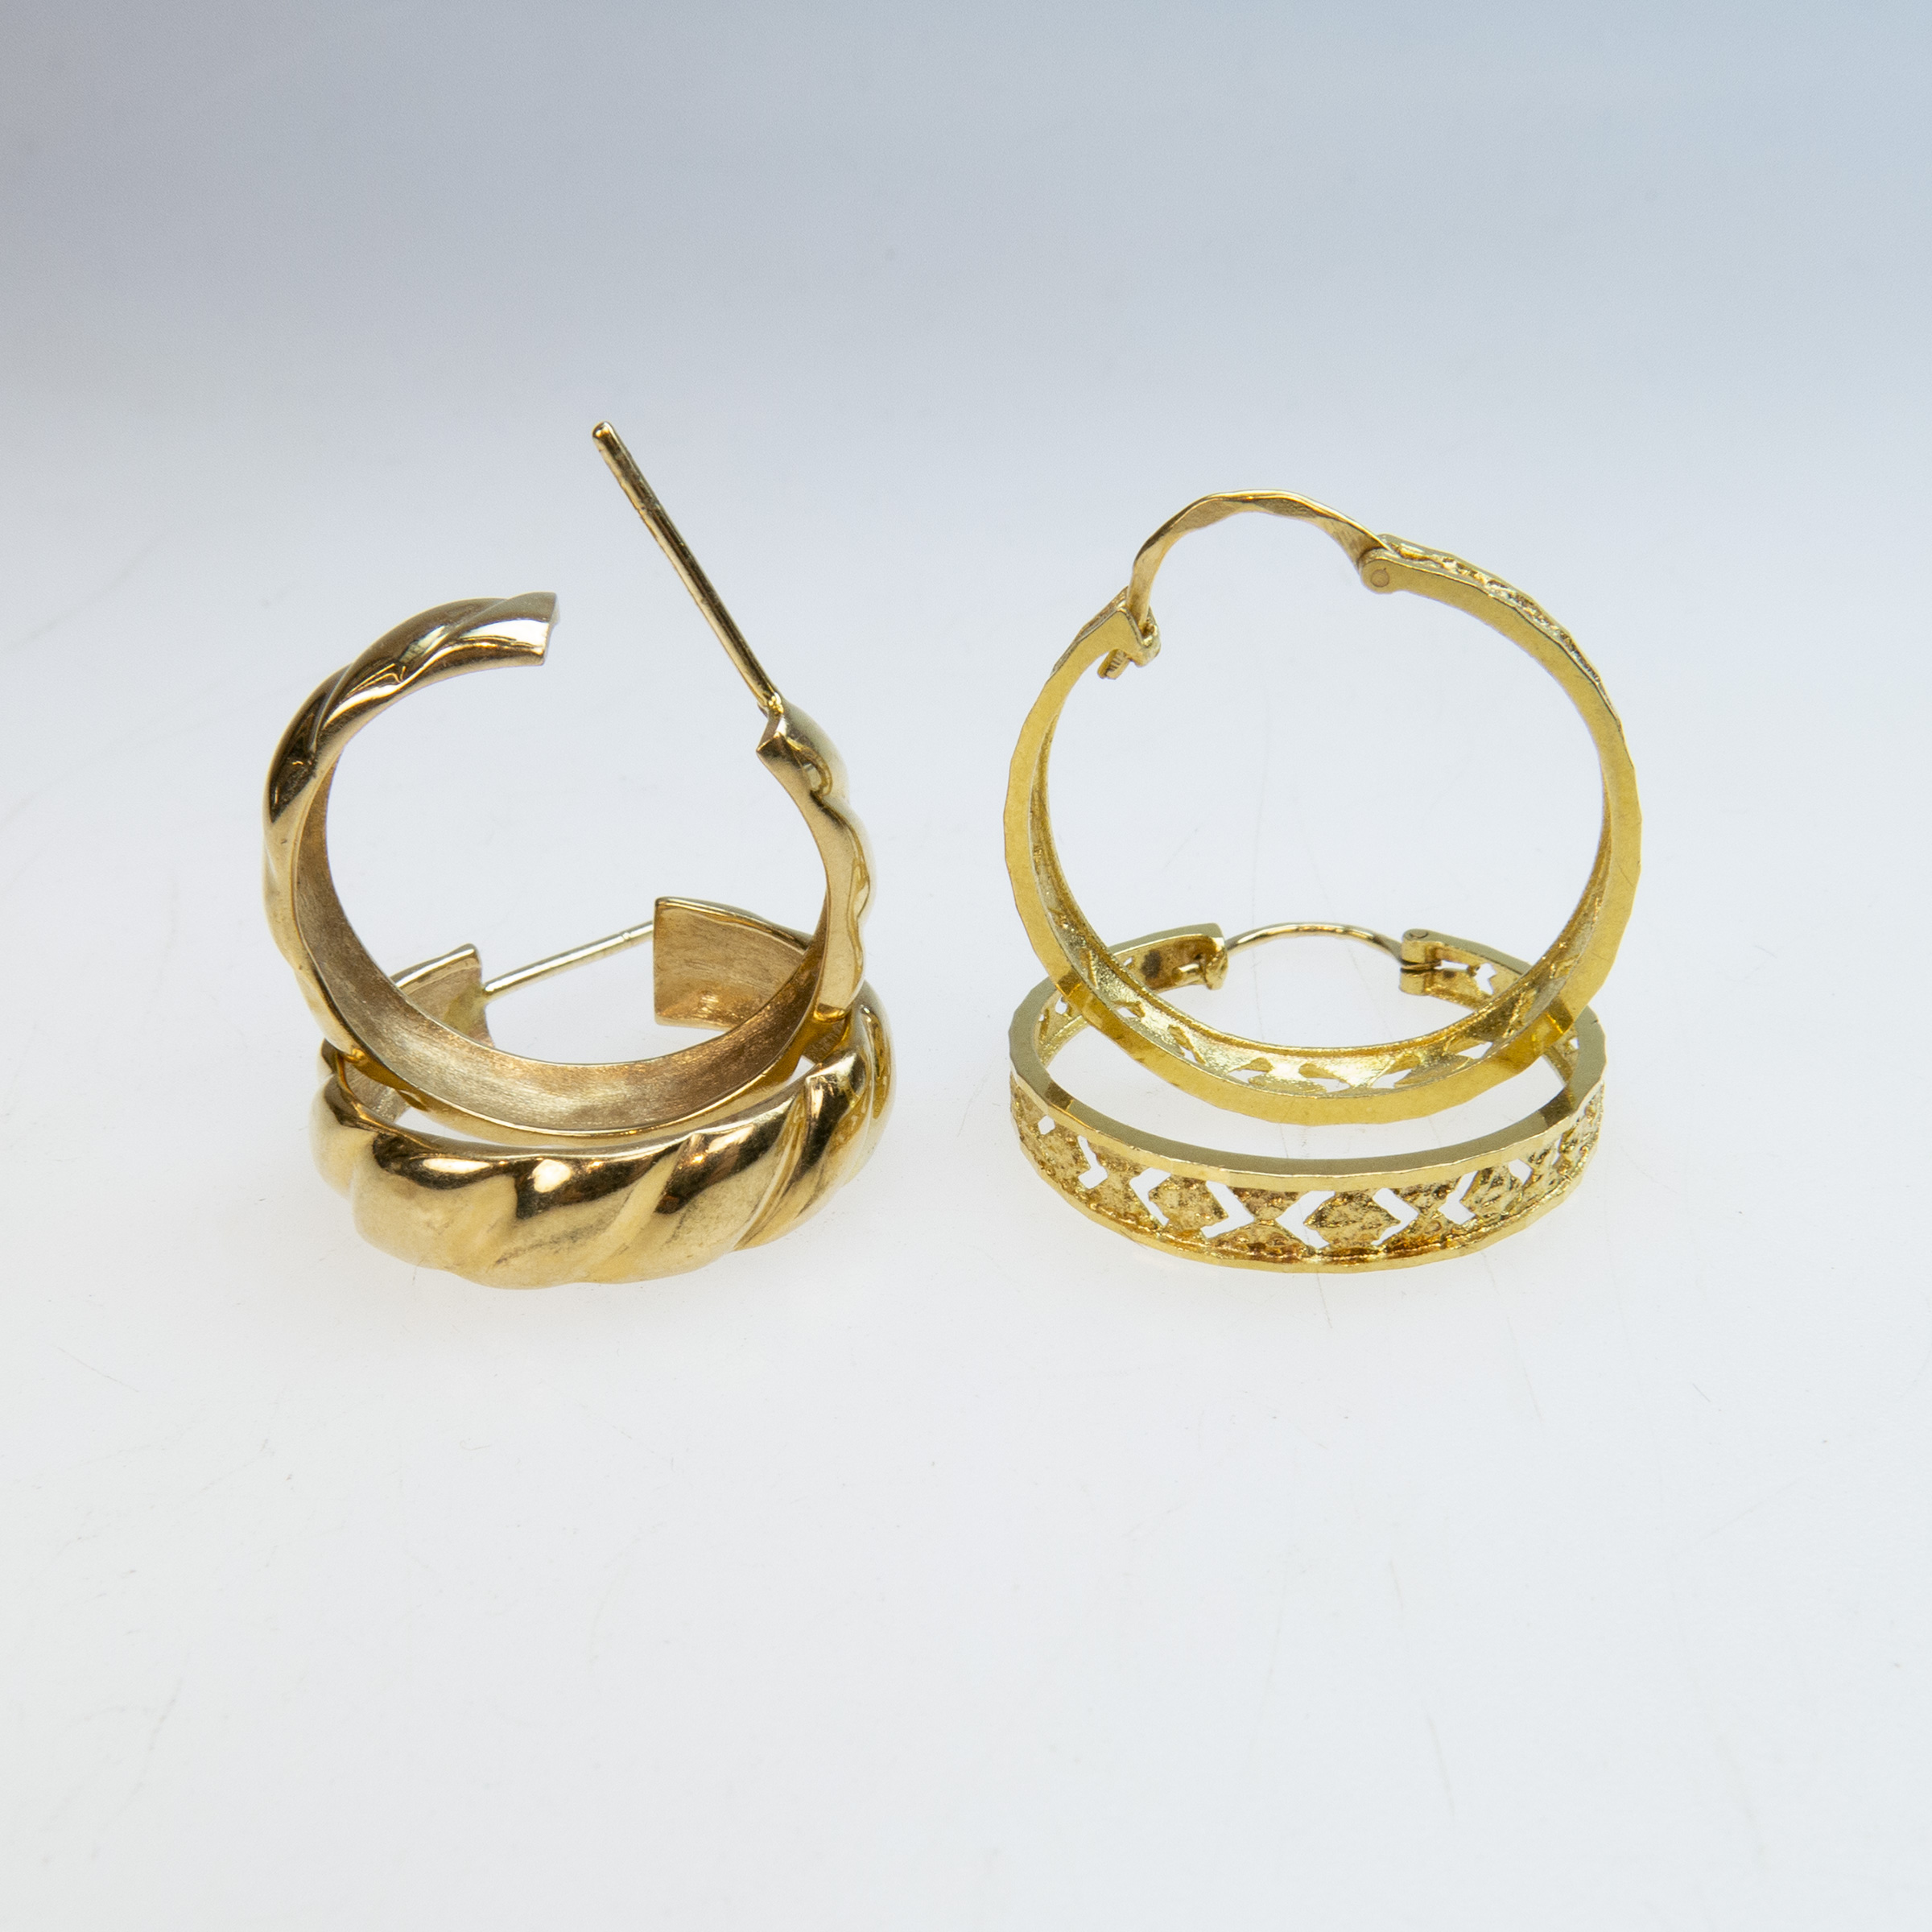 1 x 18k and 1 x 14k Pairs Of Yellow Gold Hoop Earrings